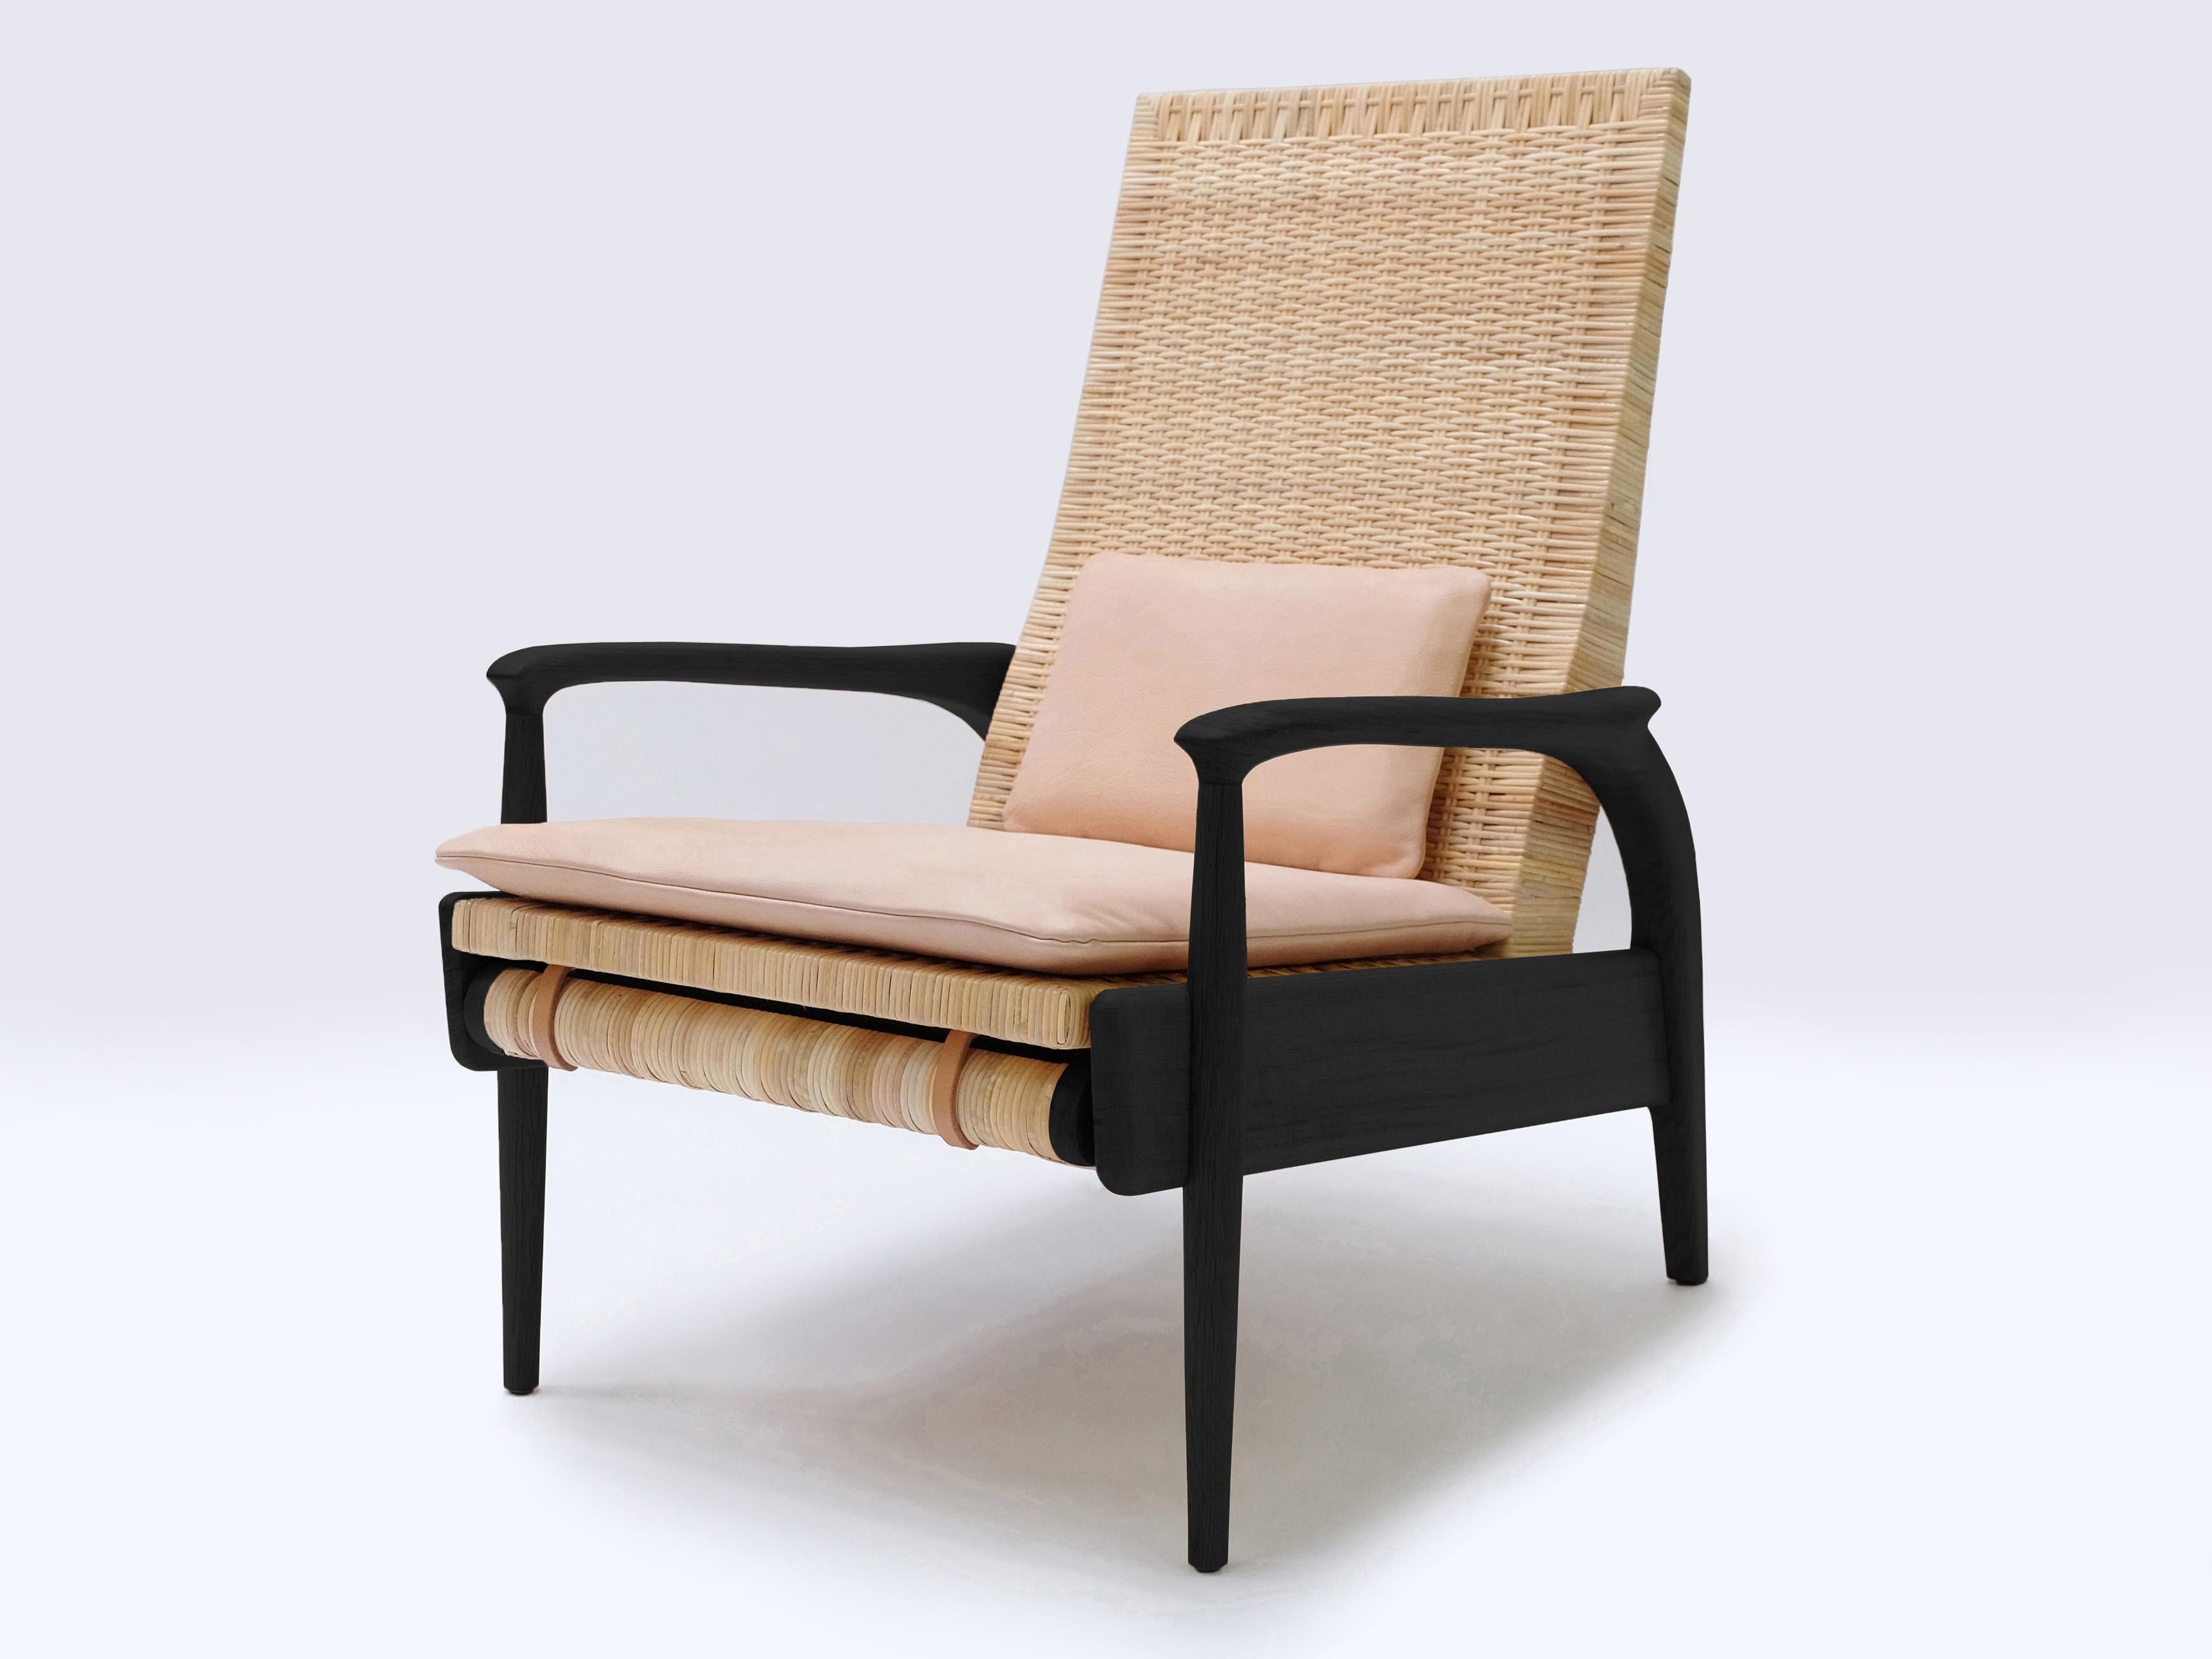 Pair of Custom-Made Handcrafted Reclining Eco Lounge Chairs FENDRIK by Studio180degree
Shown in Sustainable Solid Natural blackened Oak and Natural Undyed Cane

Noble - Tactile – Refined - Sustainable
Reclining Eco Lounge Chair FENDRIK is a noble